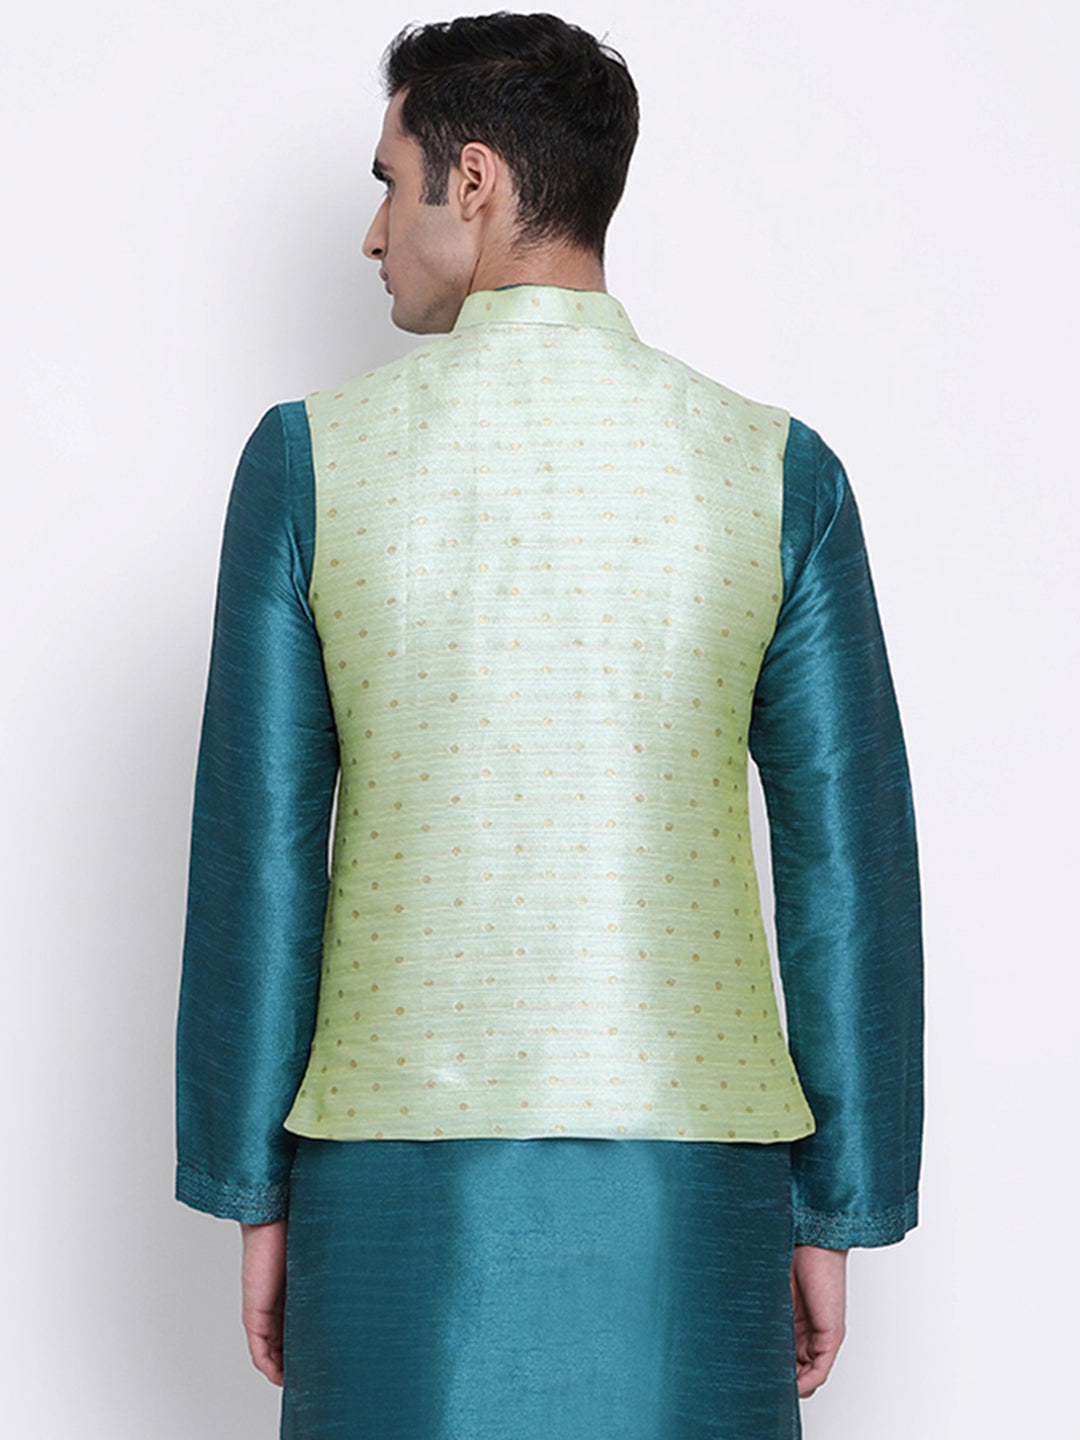 Green Wedding Nehru Jacket Online Shopping for Women at Low Prices